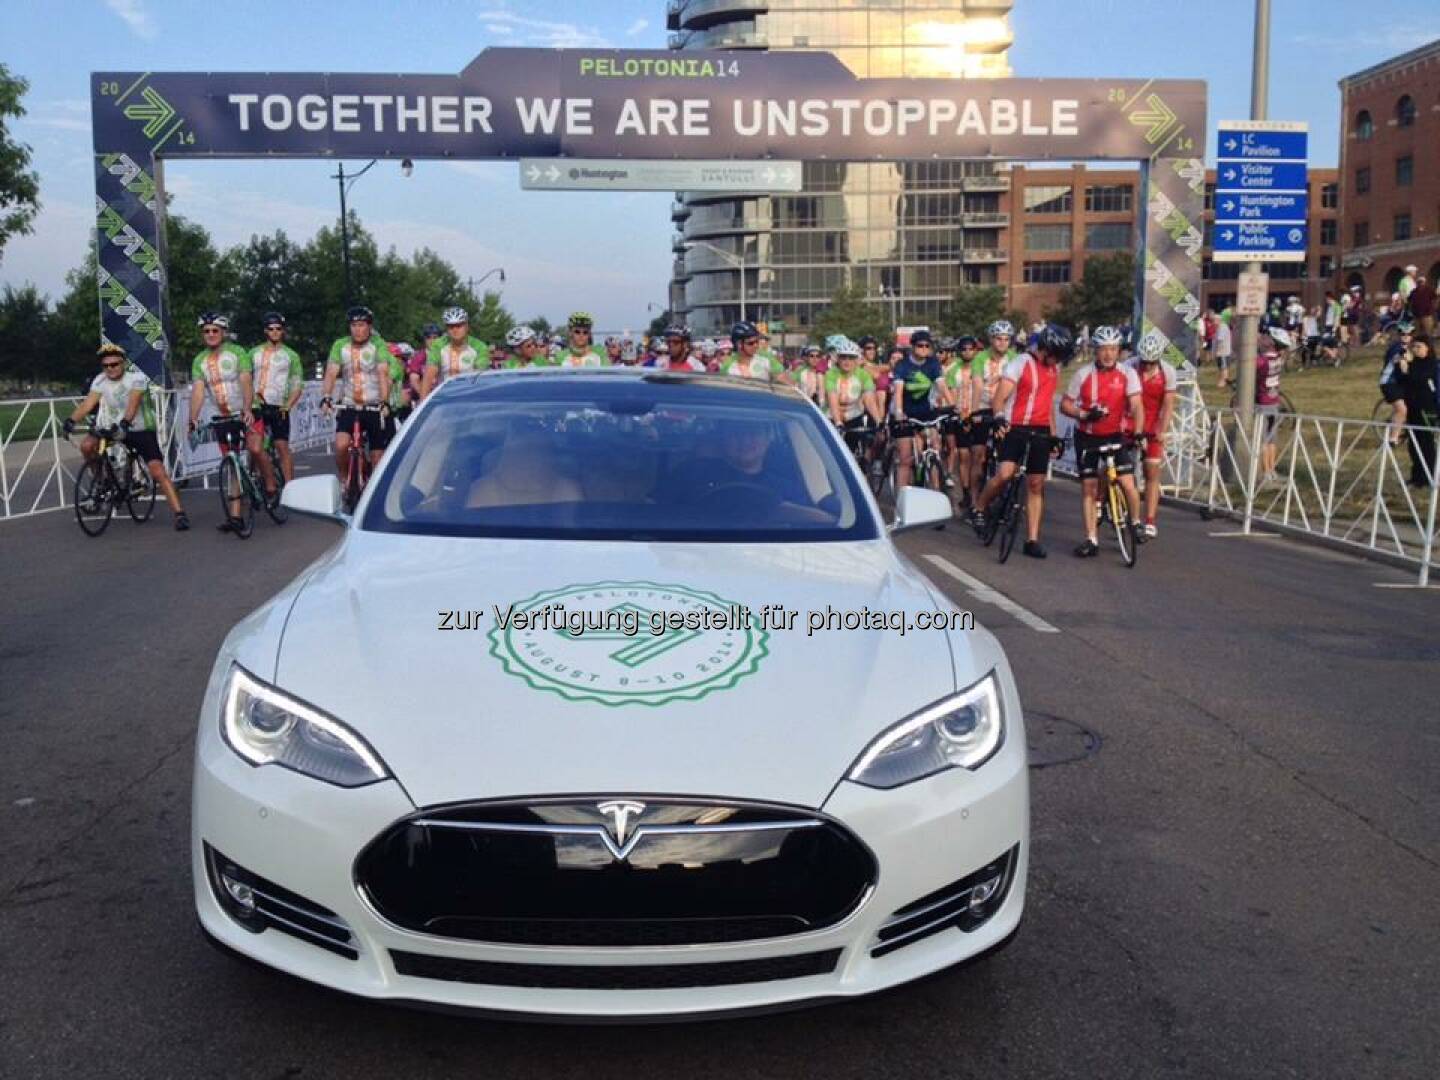 Model S is the pace car for this weekend¹s Pelotonia bike race in
Columbus, OH.  Source: http://facebook.com/teslamotors